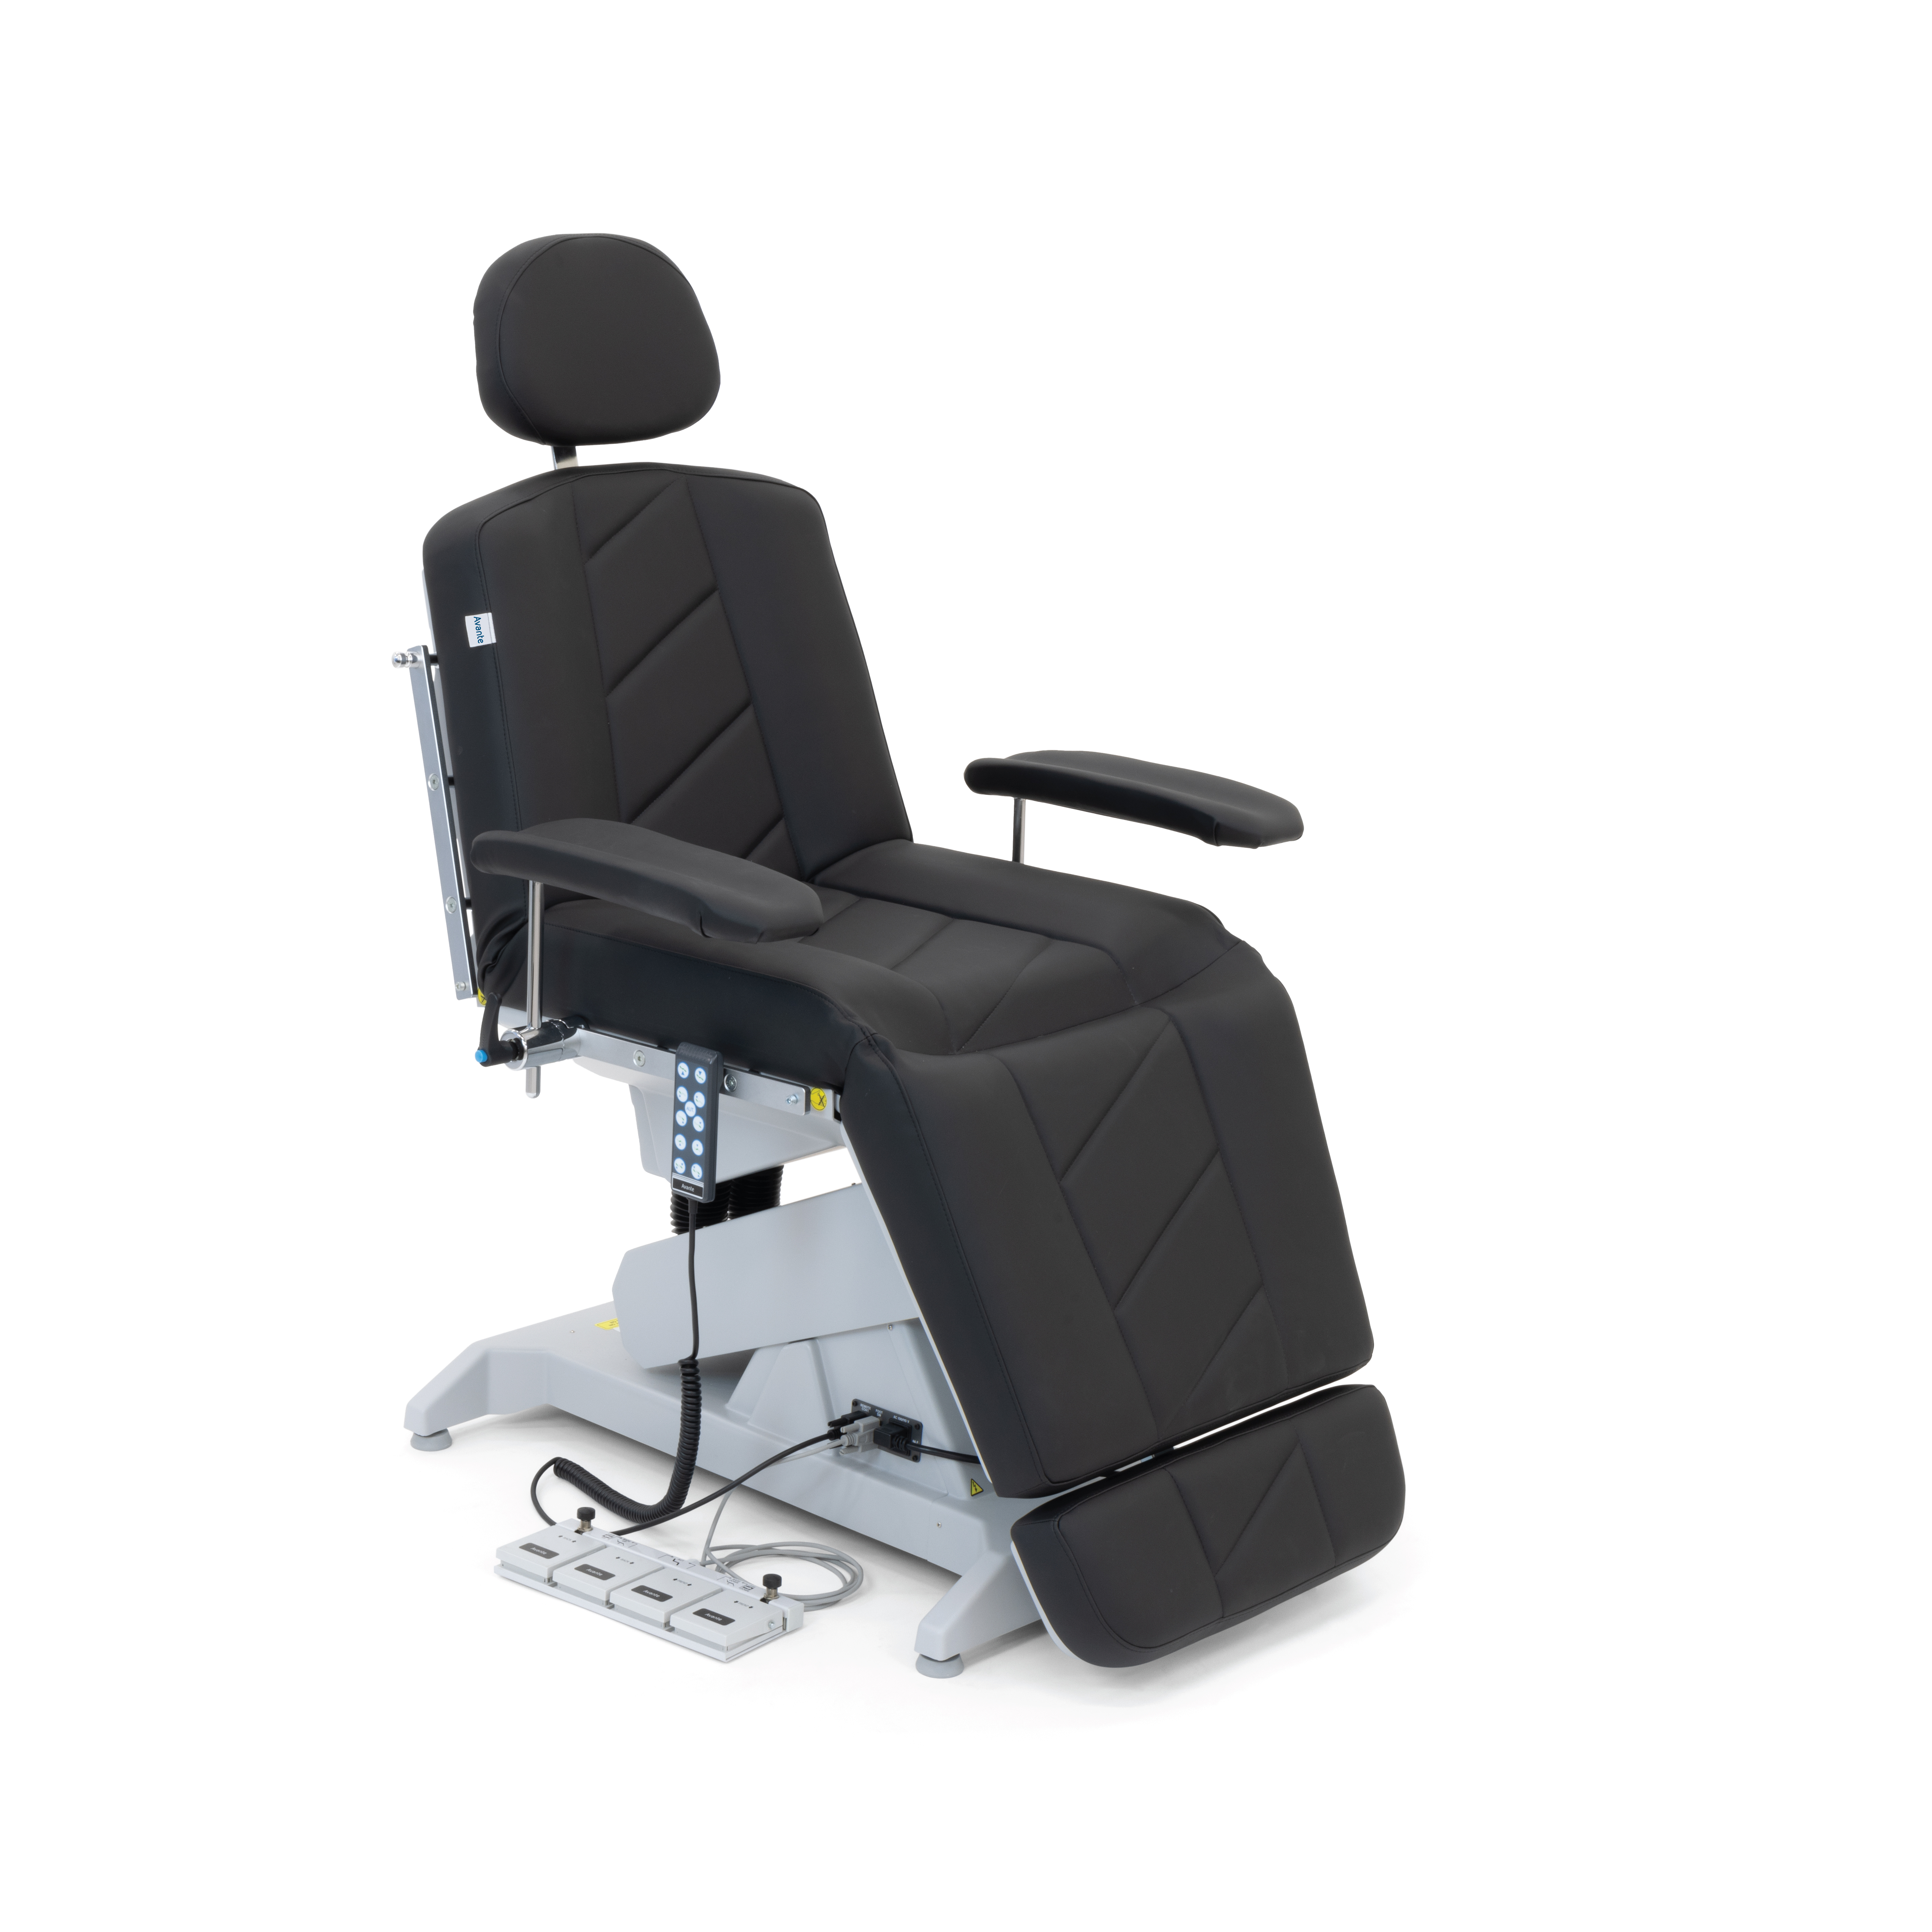 Table Power Procedure Chair Milano T50 V2 Steel  .. .  .  